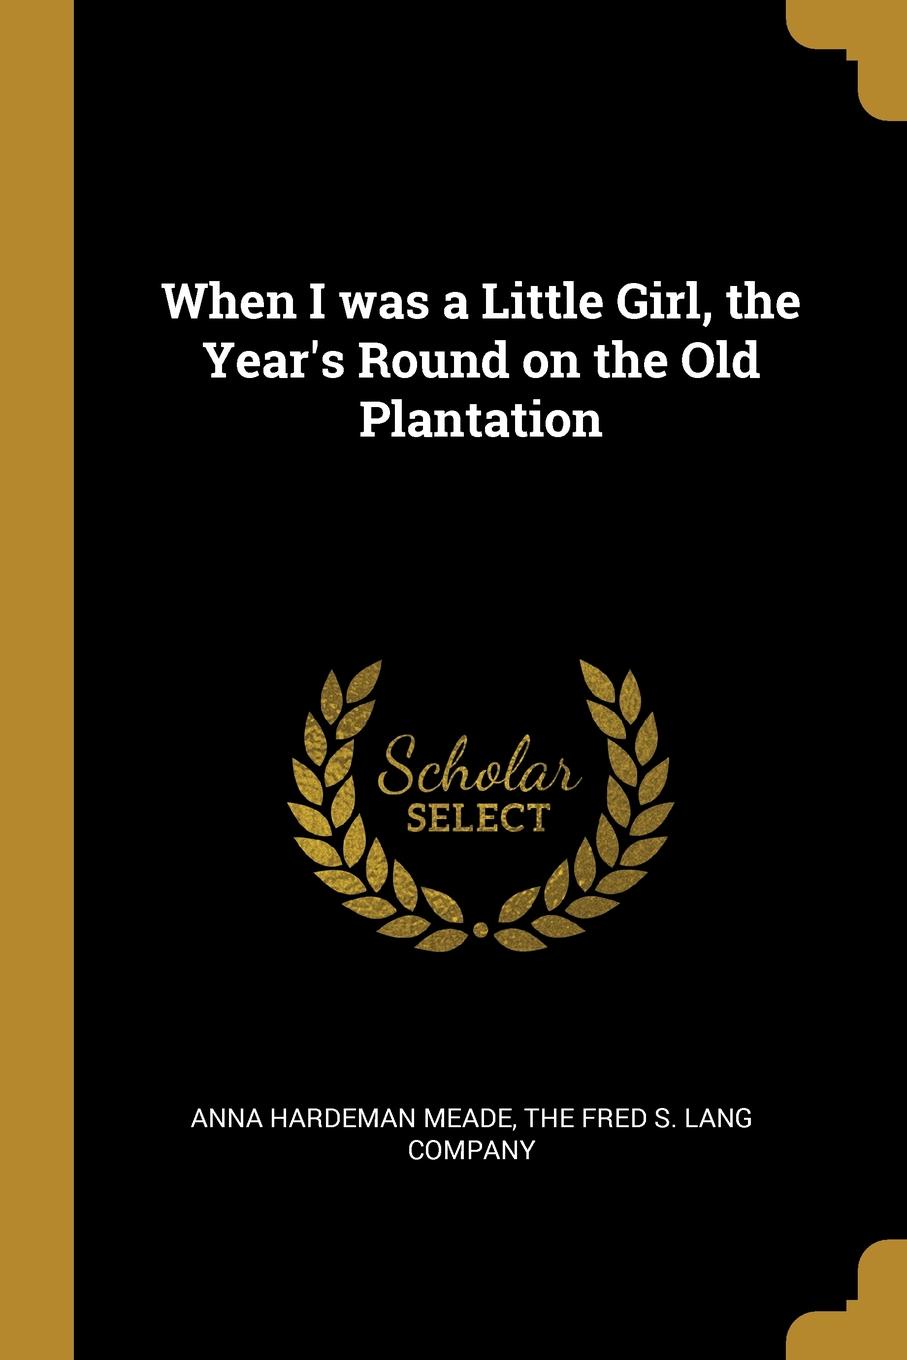 When I was a Little Girl, the Year.s Round on the Old Plantation